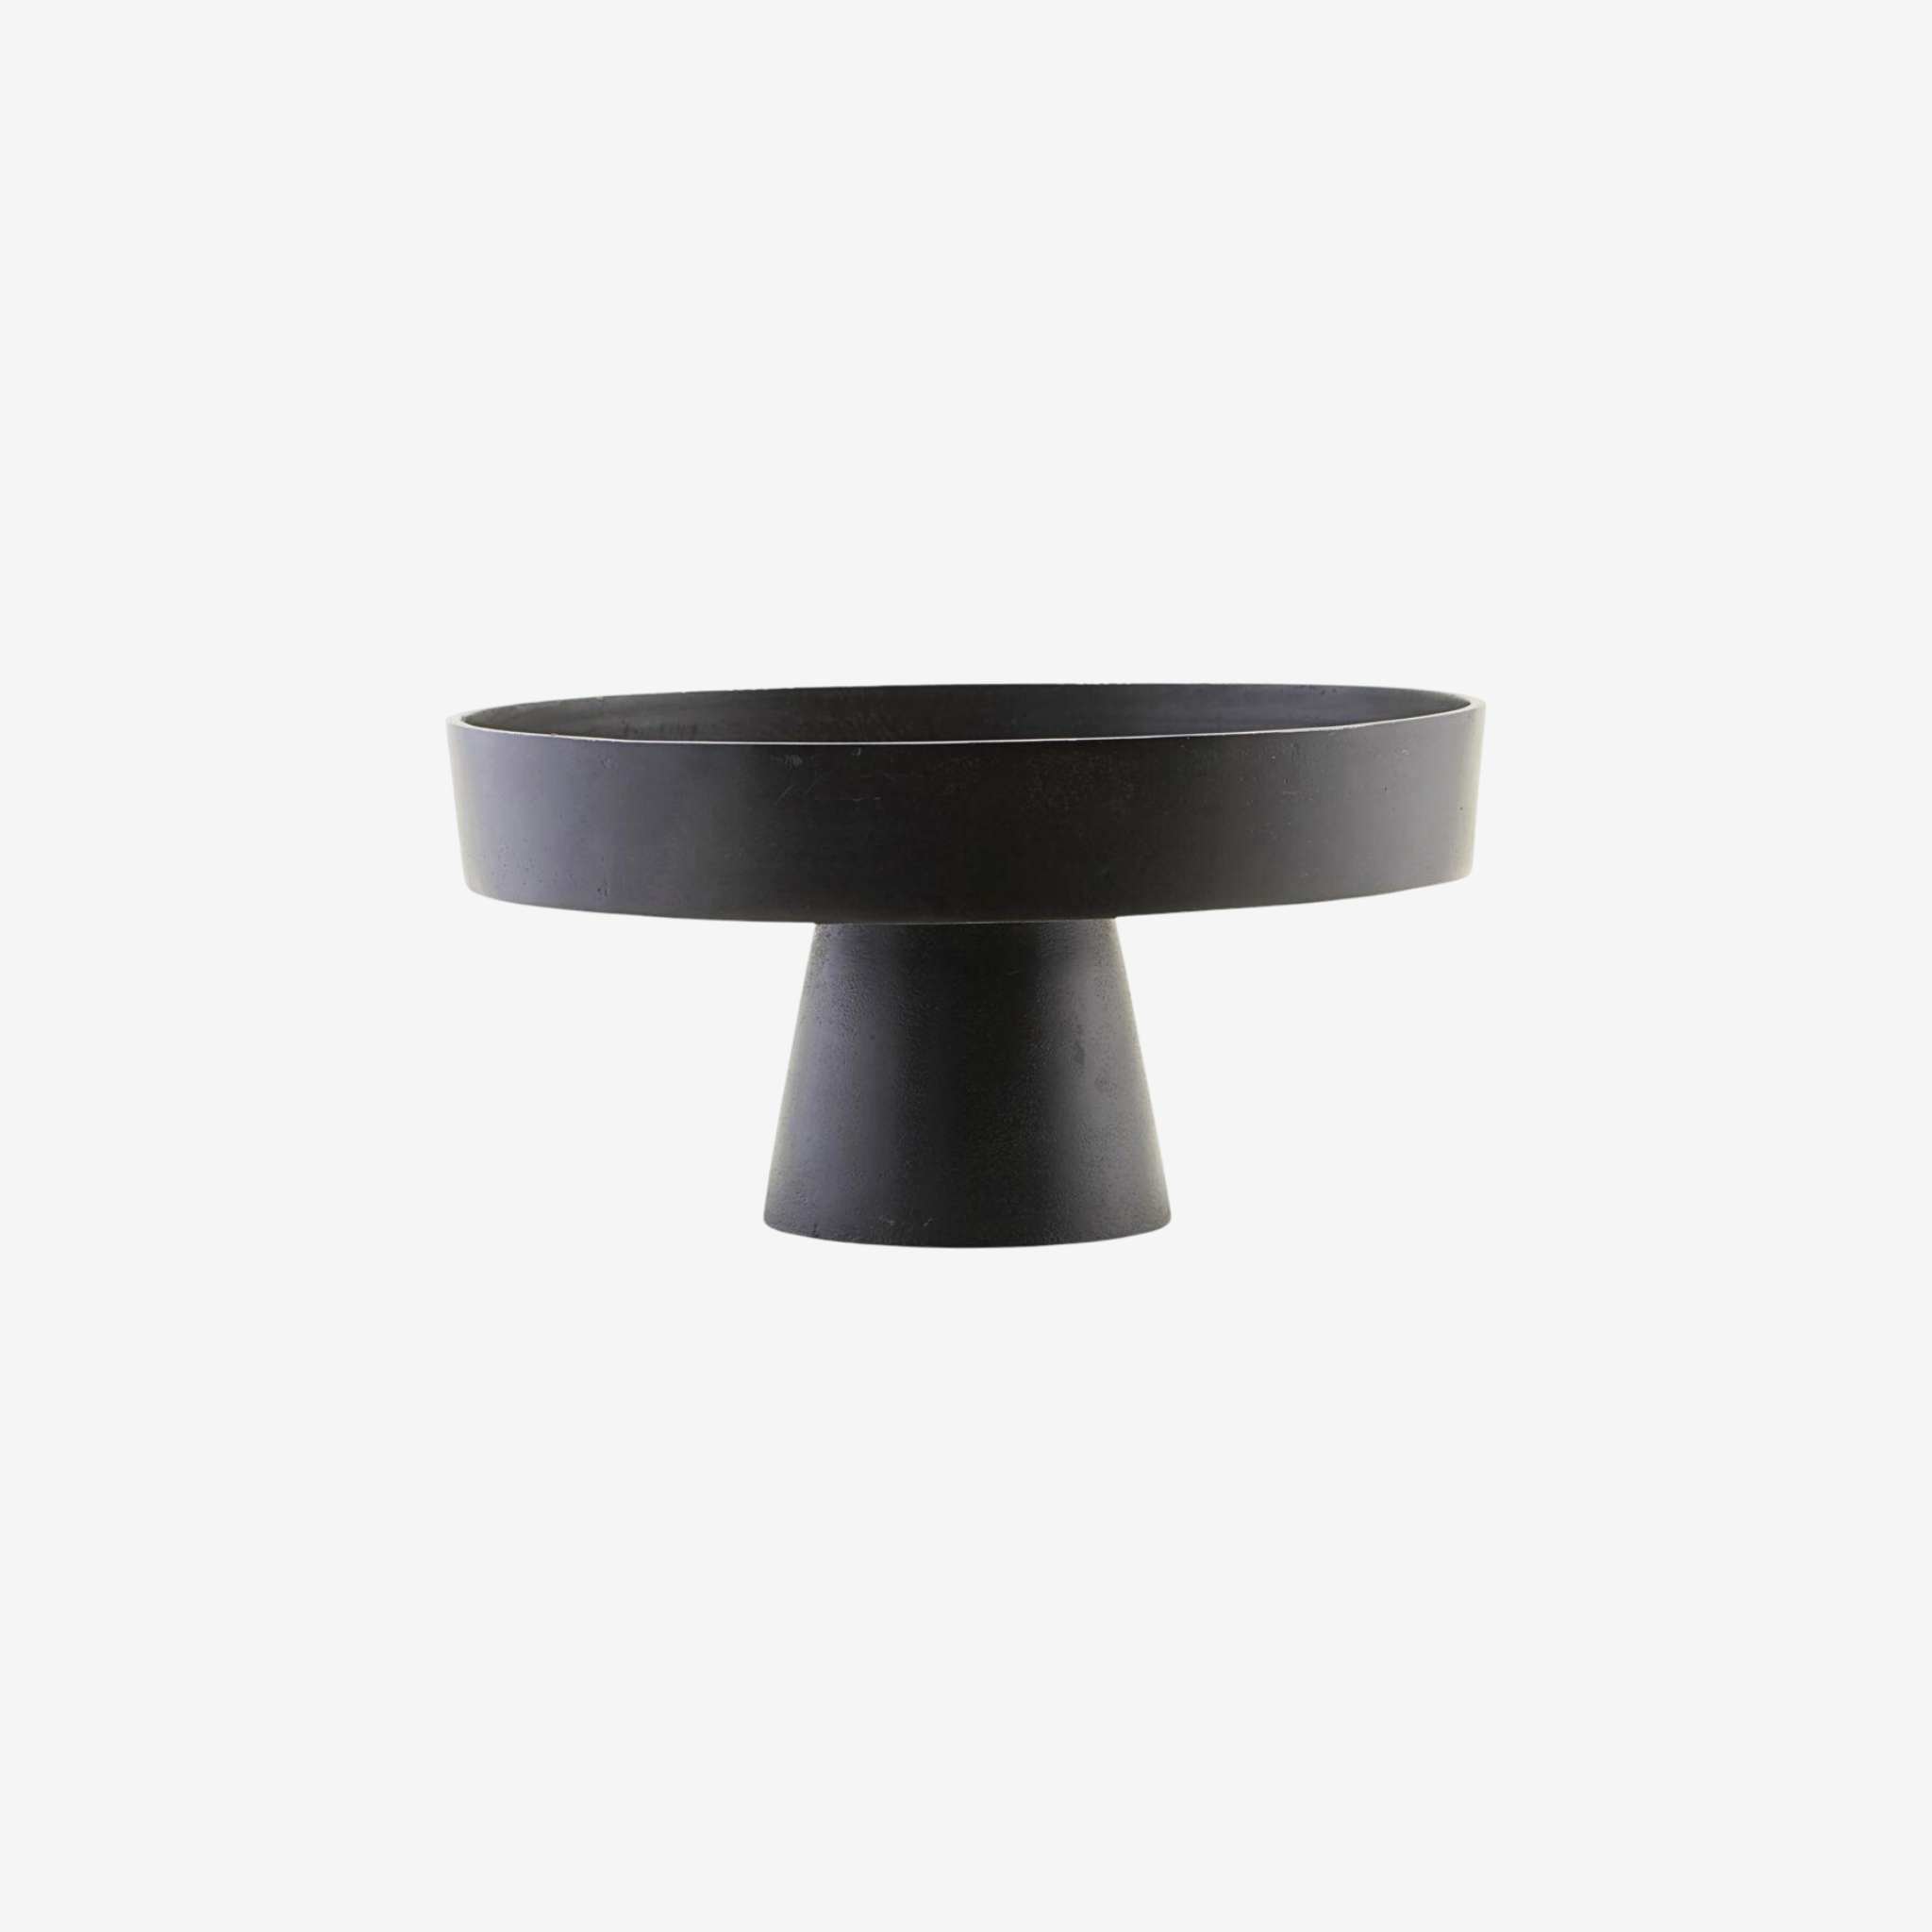 Black Oxidized Decorative Stand - Simply Elevated Home Furnishings 